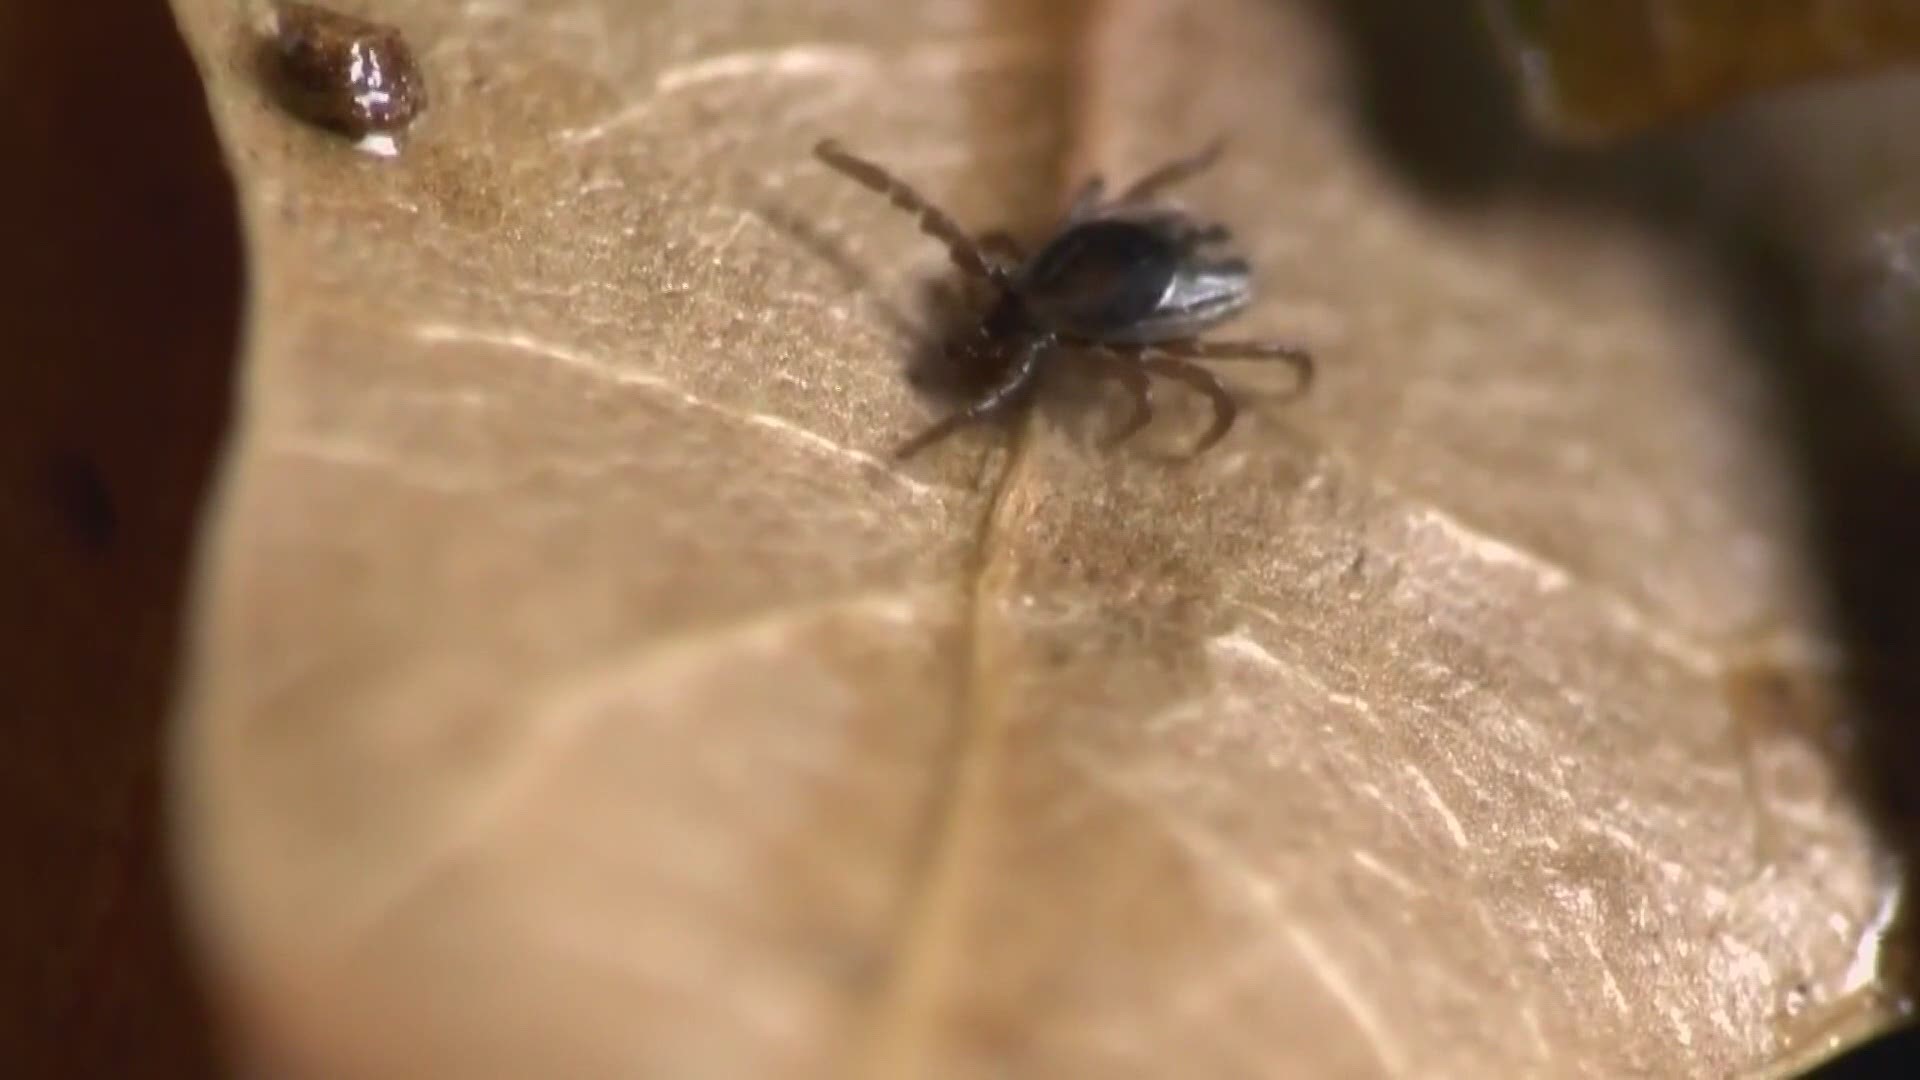 So far this year, more than one hundred tick samples have been sent to University of Maine Tick Lab in Orono, the majority are deer ticks that carry lyme disease.